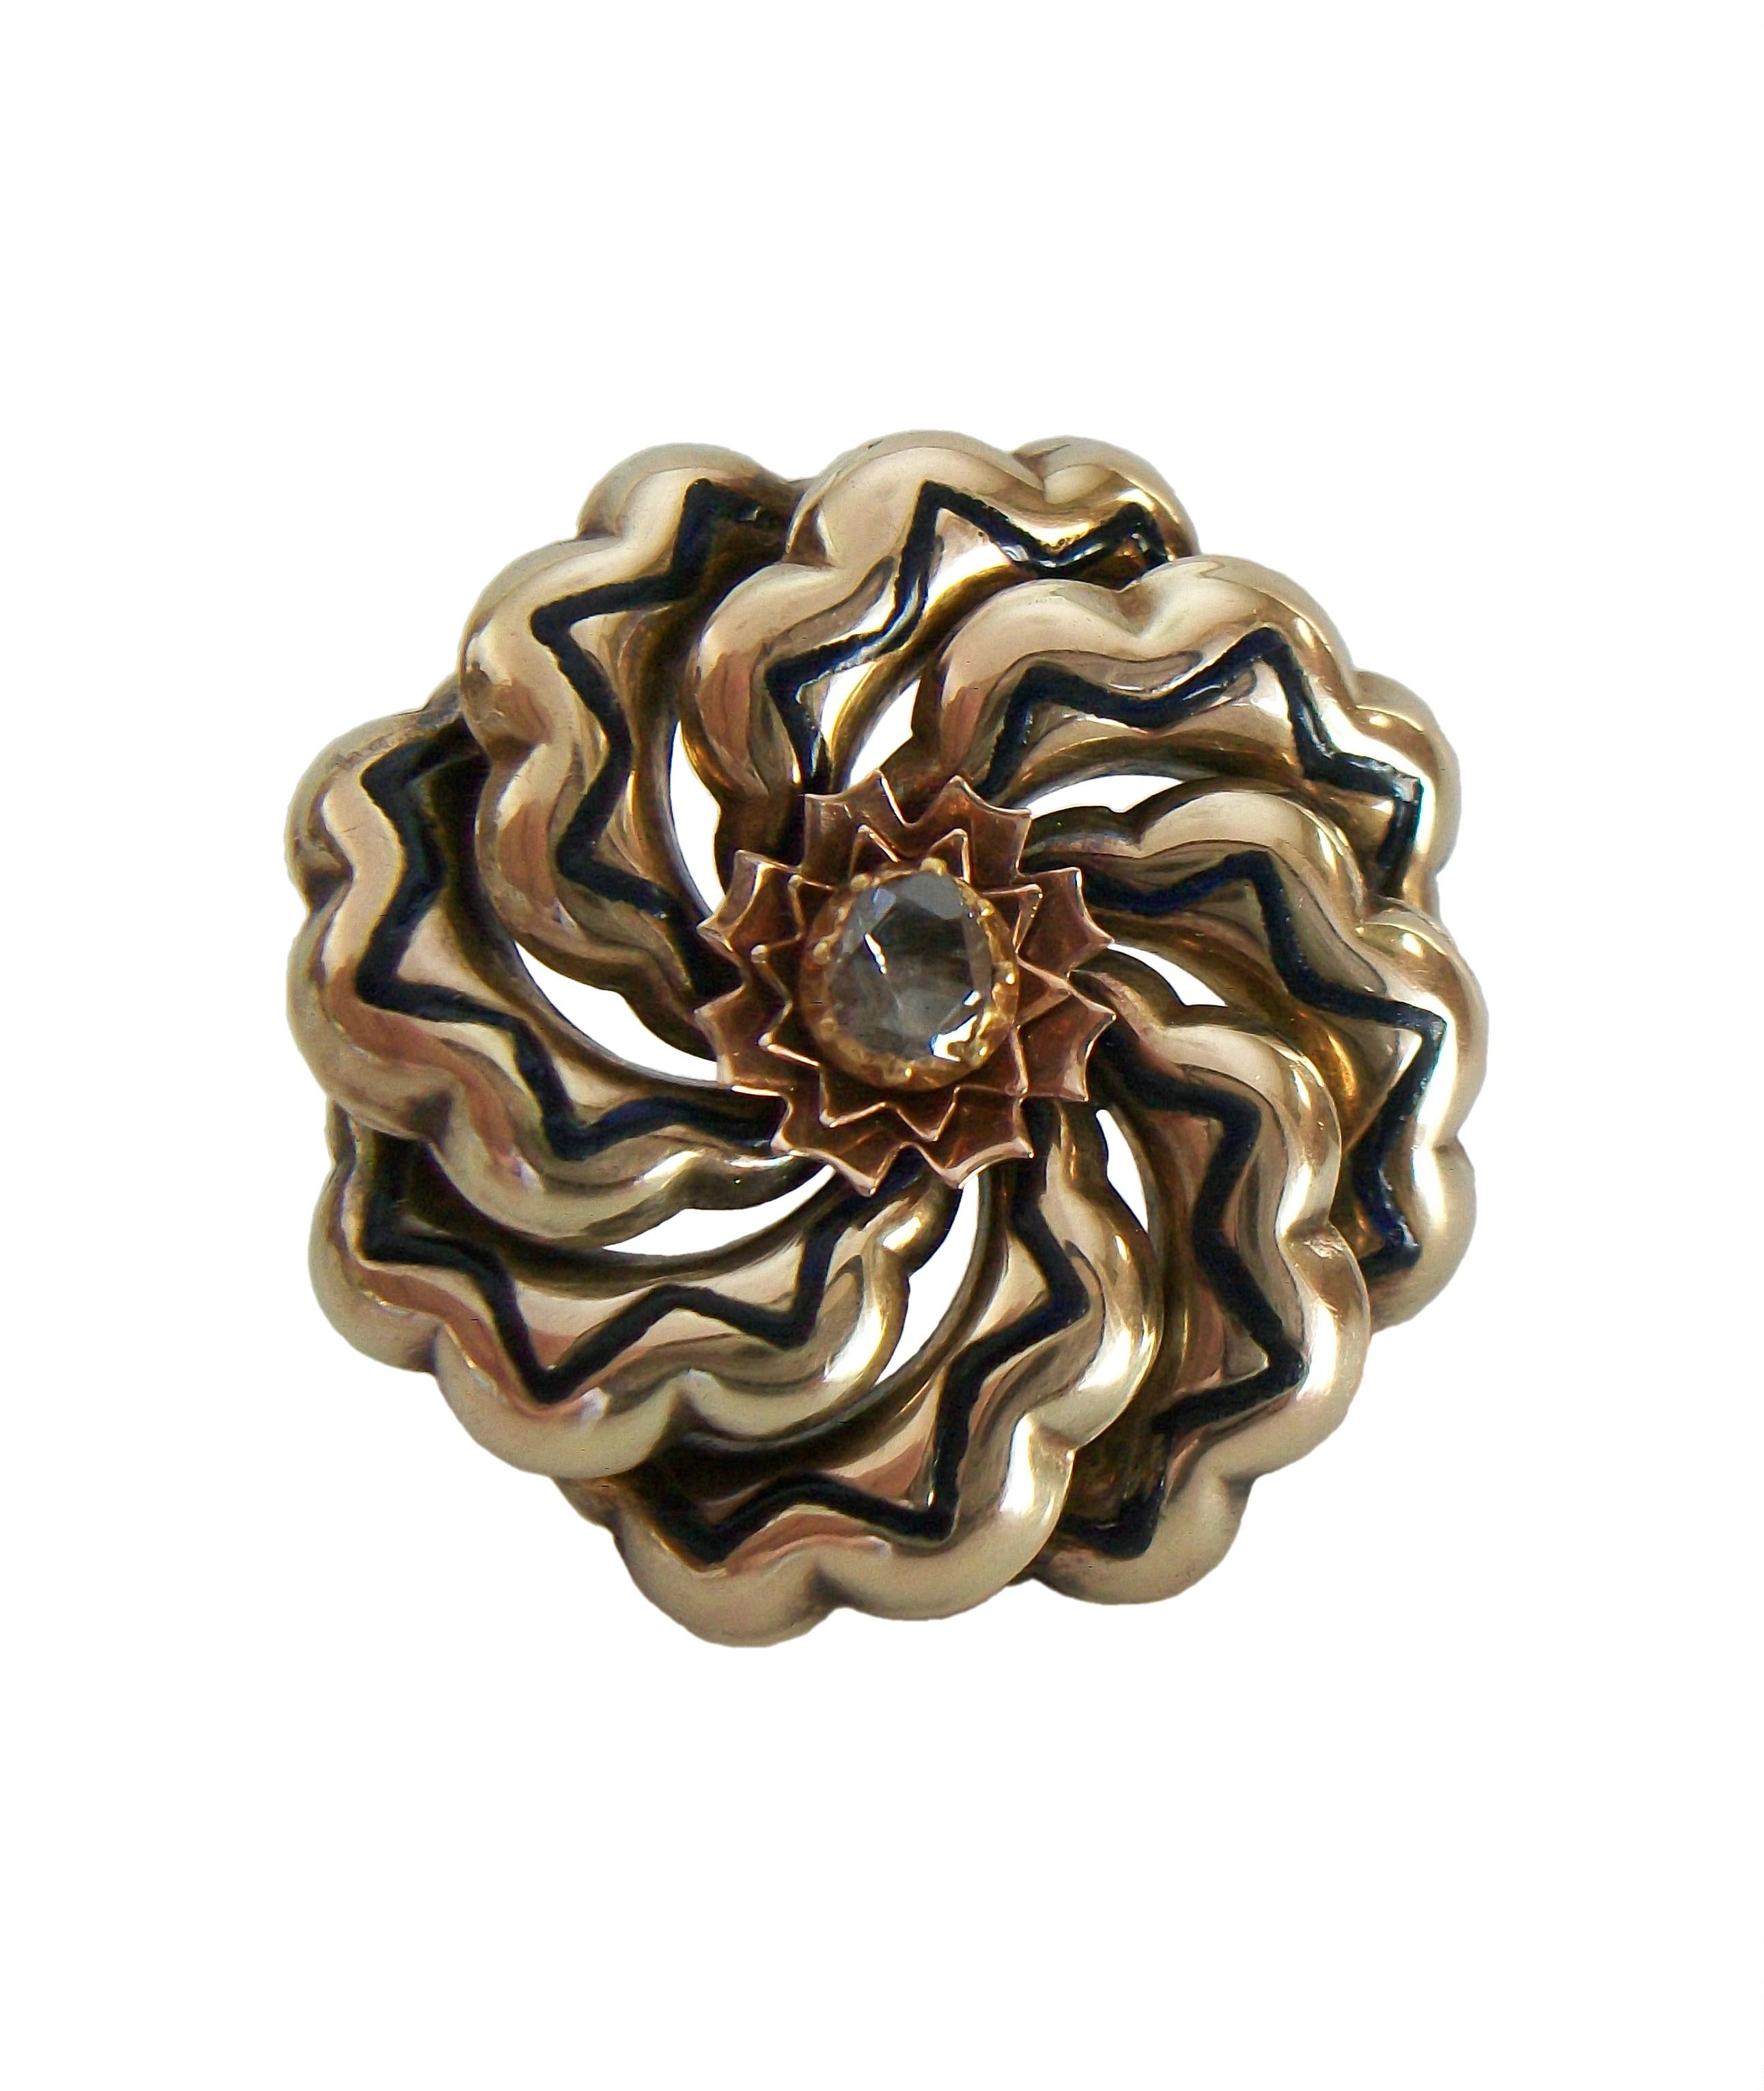 Women's Victorian Gold & Enamel Flower Brooch with Center Rose Cut Diamond, Circa 1900 For Sale